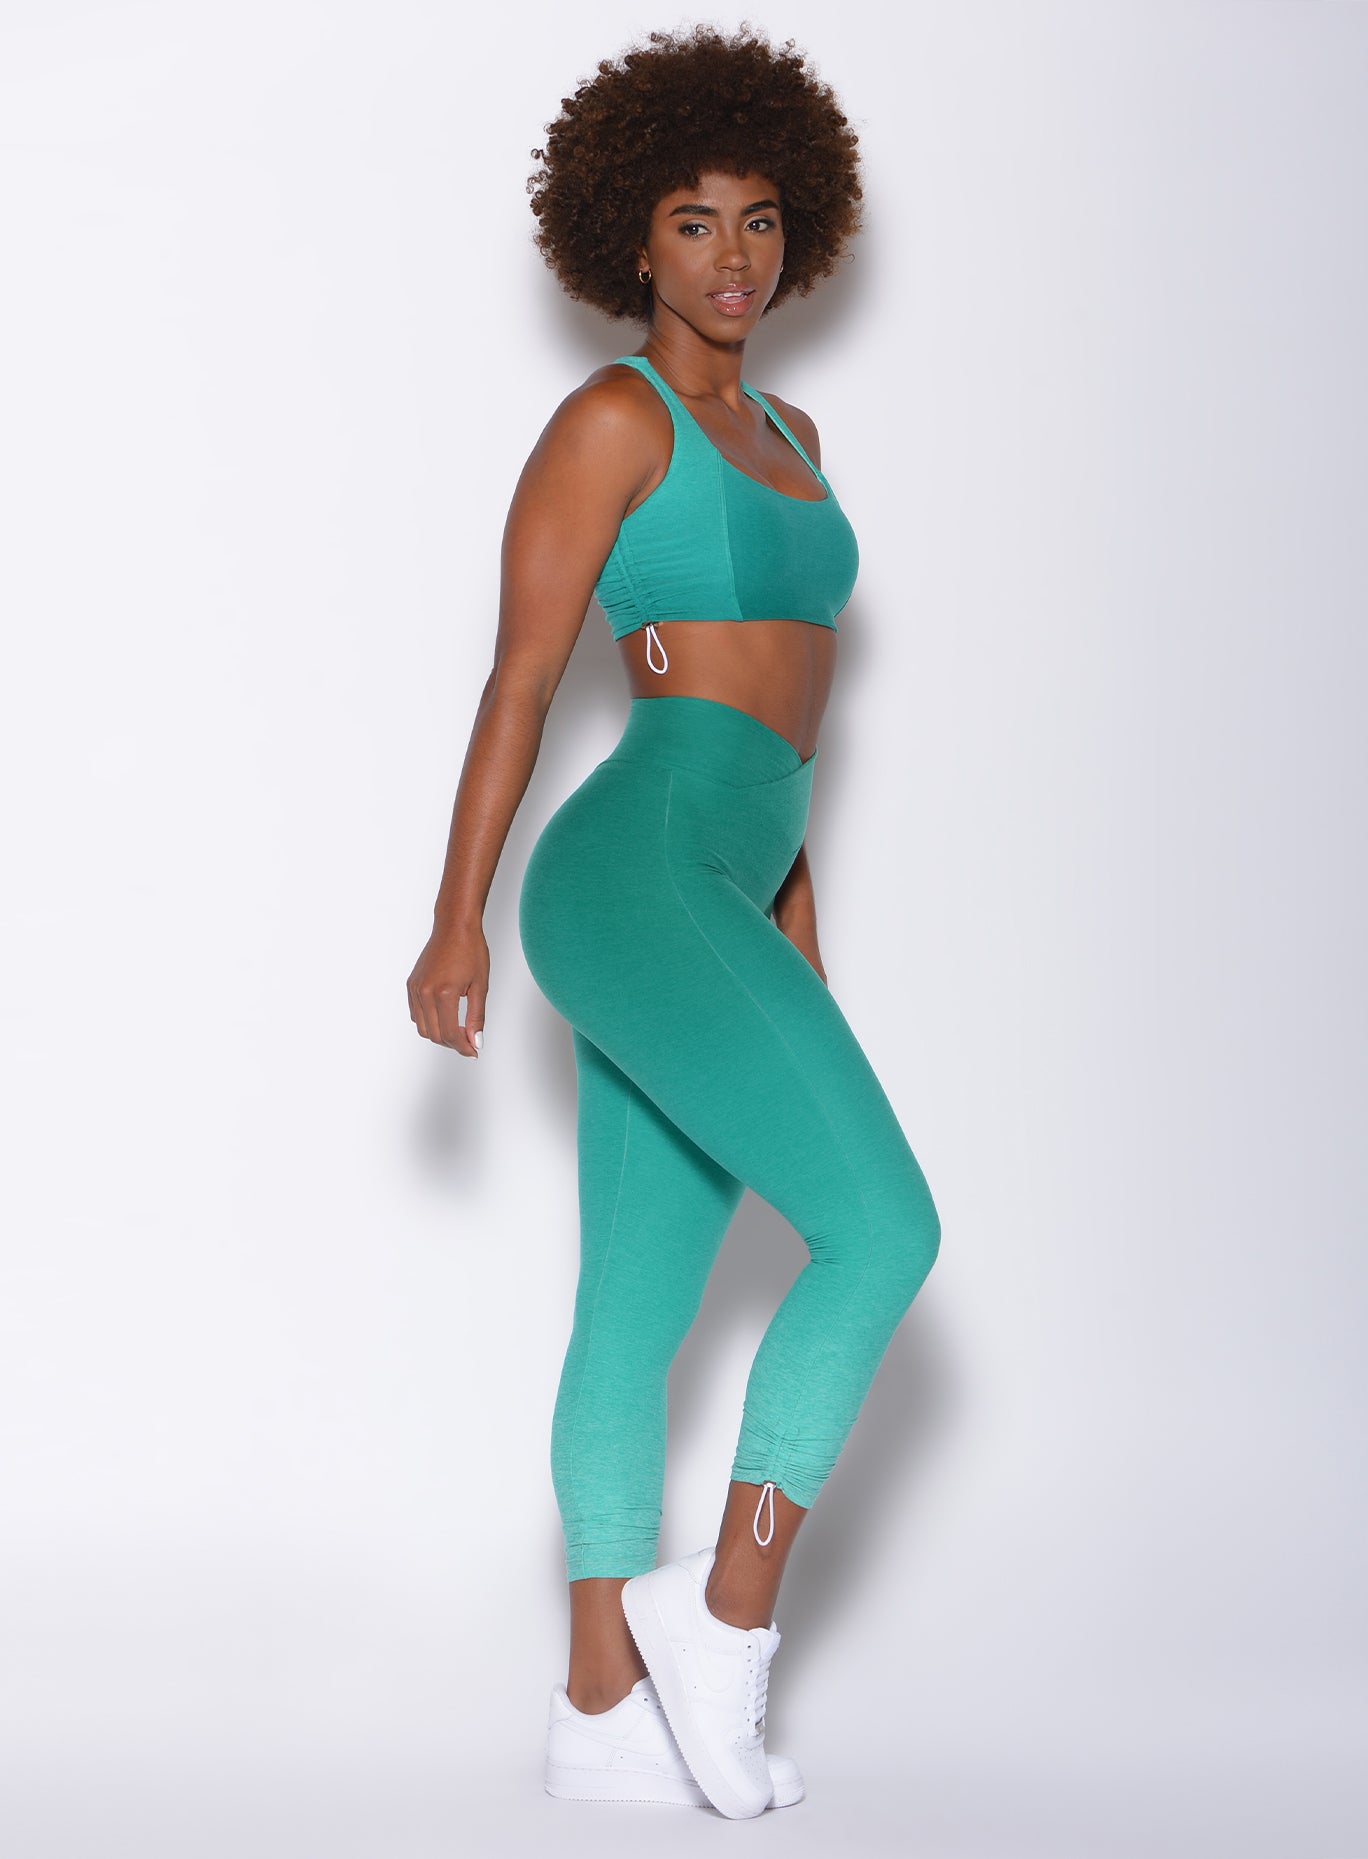 Right side profile view of a model facing to her left wearing our toggle leggings in Ombre Ibiza Green and a matching sports bra